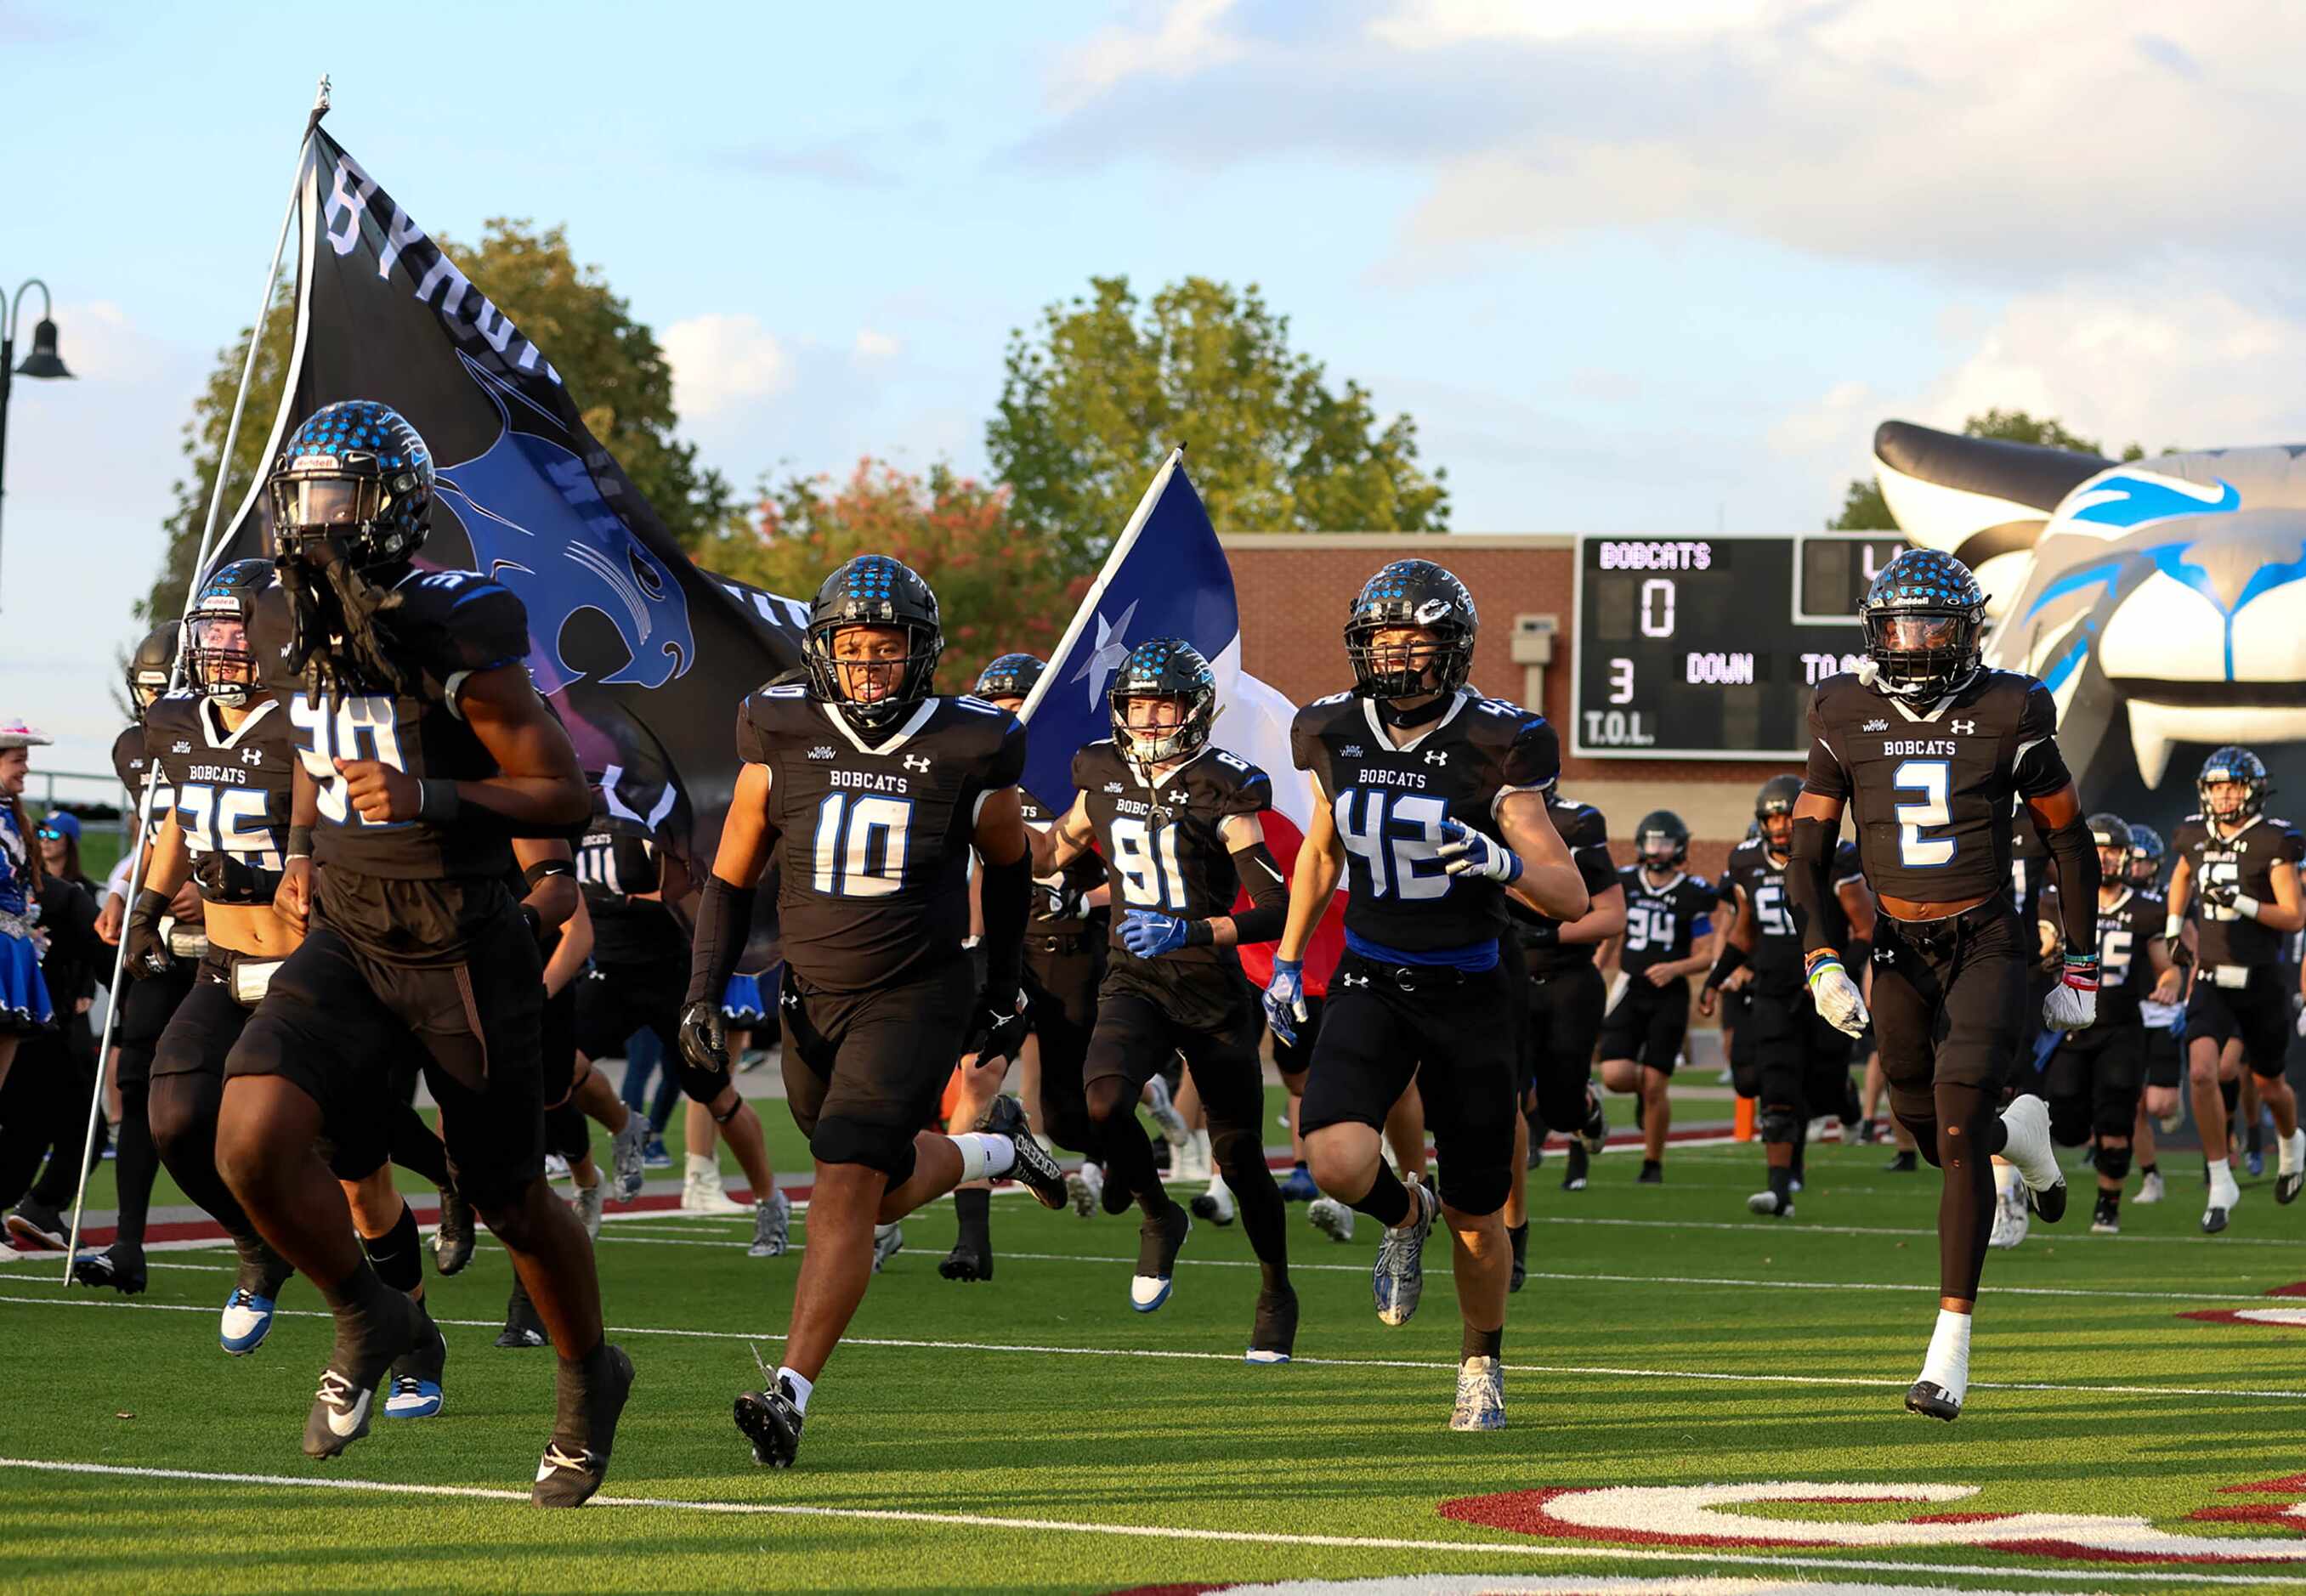 The Byron Nelson Bobcats enter the field to face Southlake Carroll in a District 4-6A high...